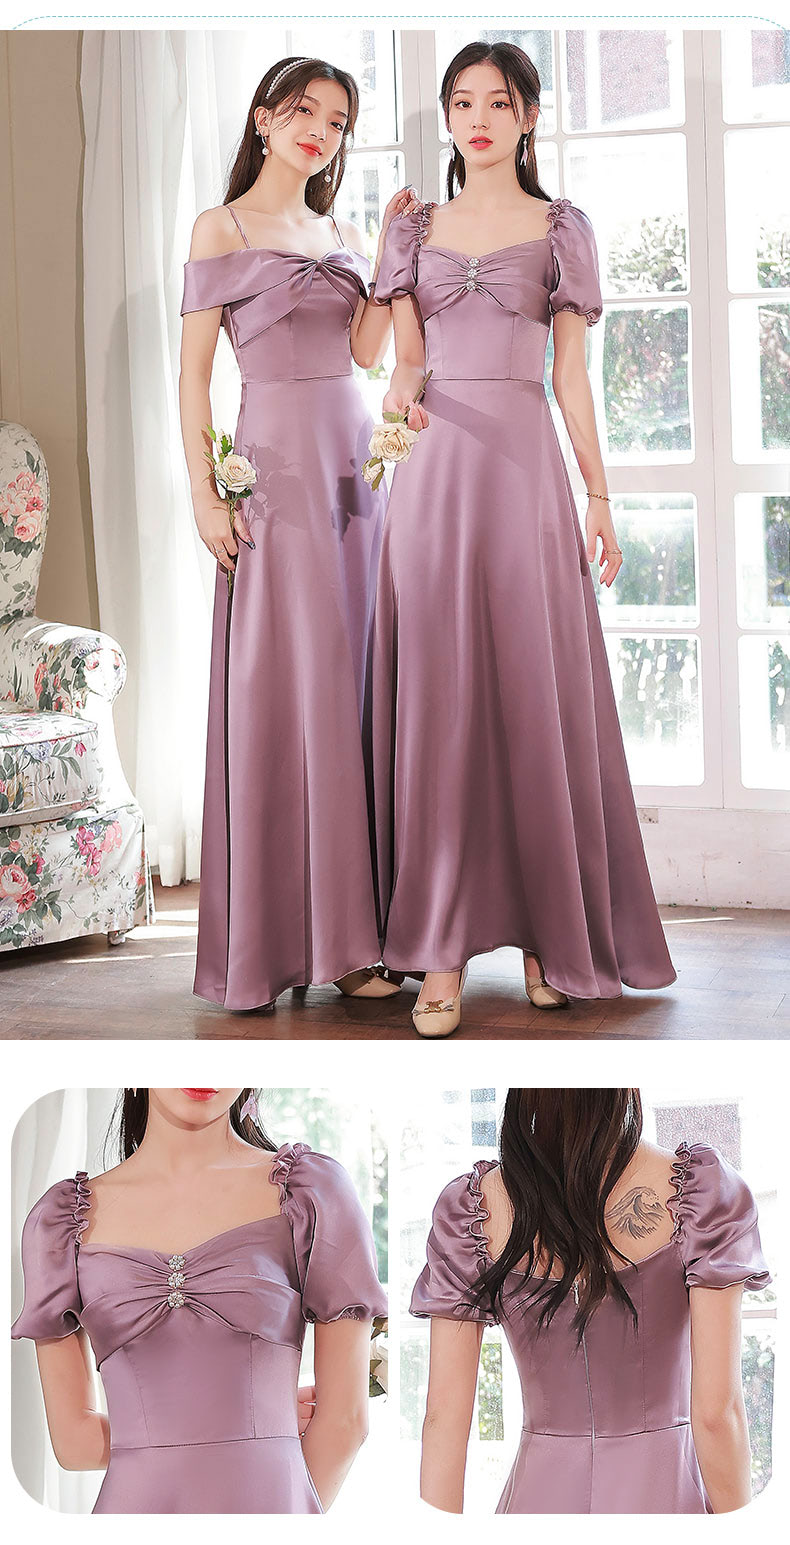 Sweet-Sexy-Purple-Satin-Bridesmaid-Long-Dress-Party-Casual-Ball-Gown21.jpg